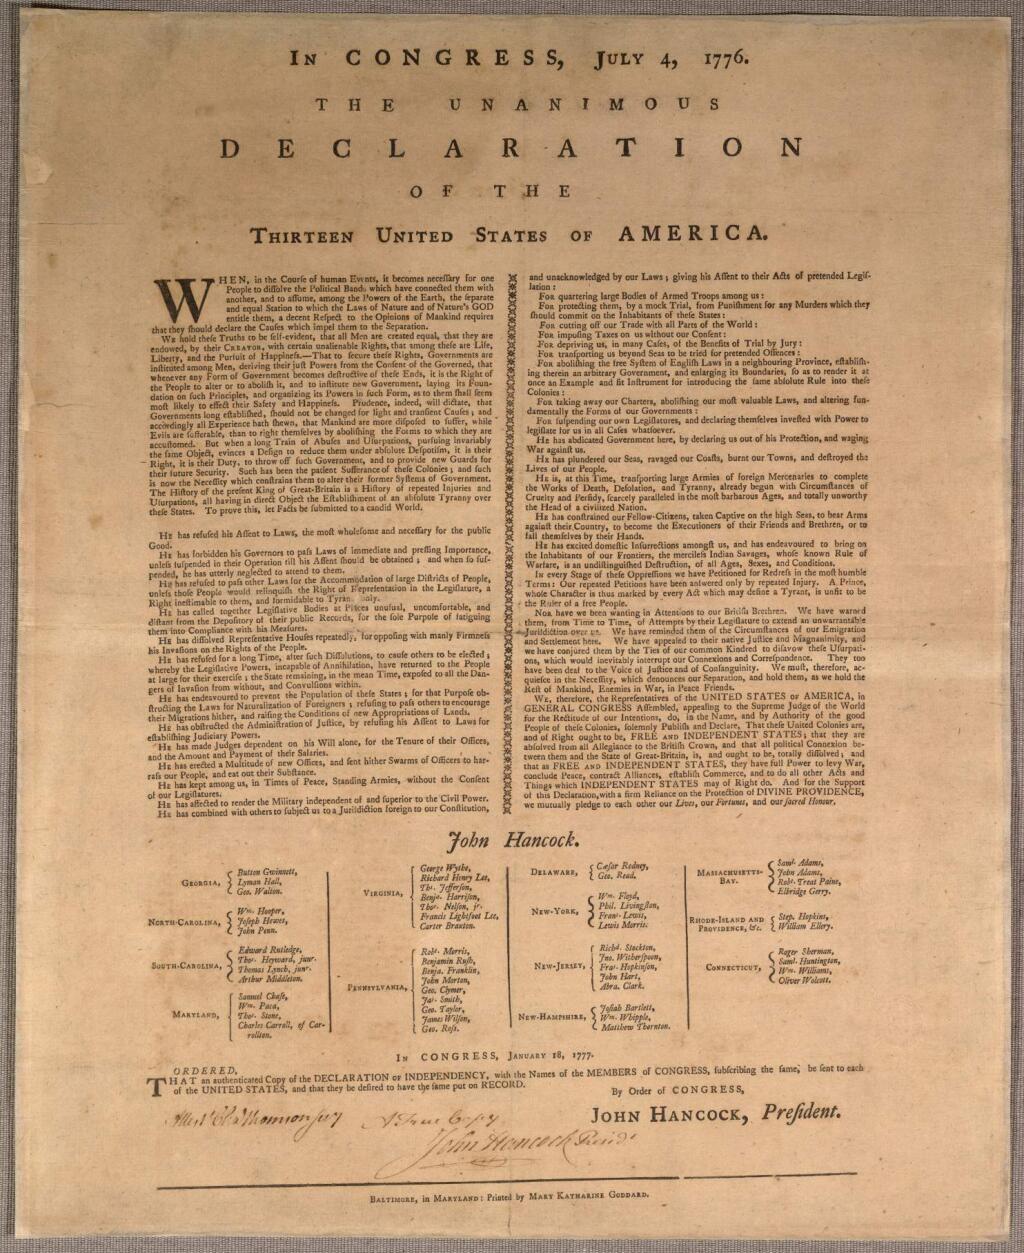 The Declaration of Independence printed with the names of the signers. Mary Katherine Goddard's name is at the bottom. (Library of Congress, Rare Book and Special Collections Division, Continental Congress & Constitutional Convention Broadsides Collection)